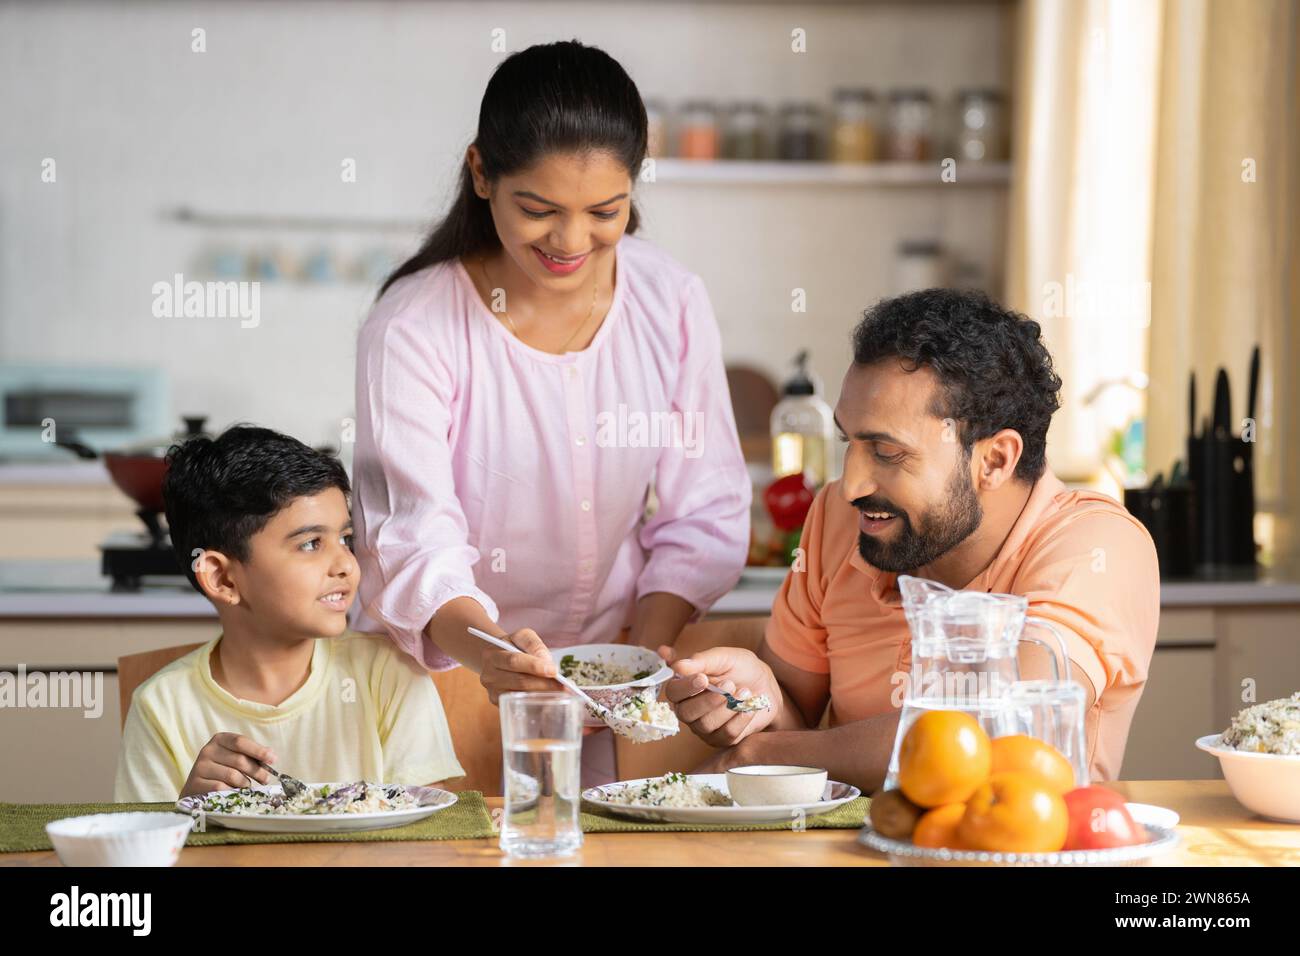 Happy Indian woman serving food to her son and husband on dining table at home - concept of family bonding, household responsibility and togetherness Stock Photo